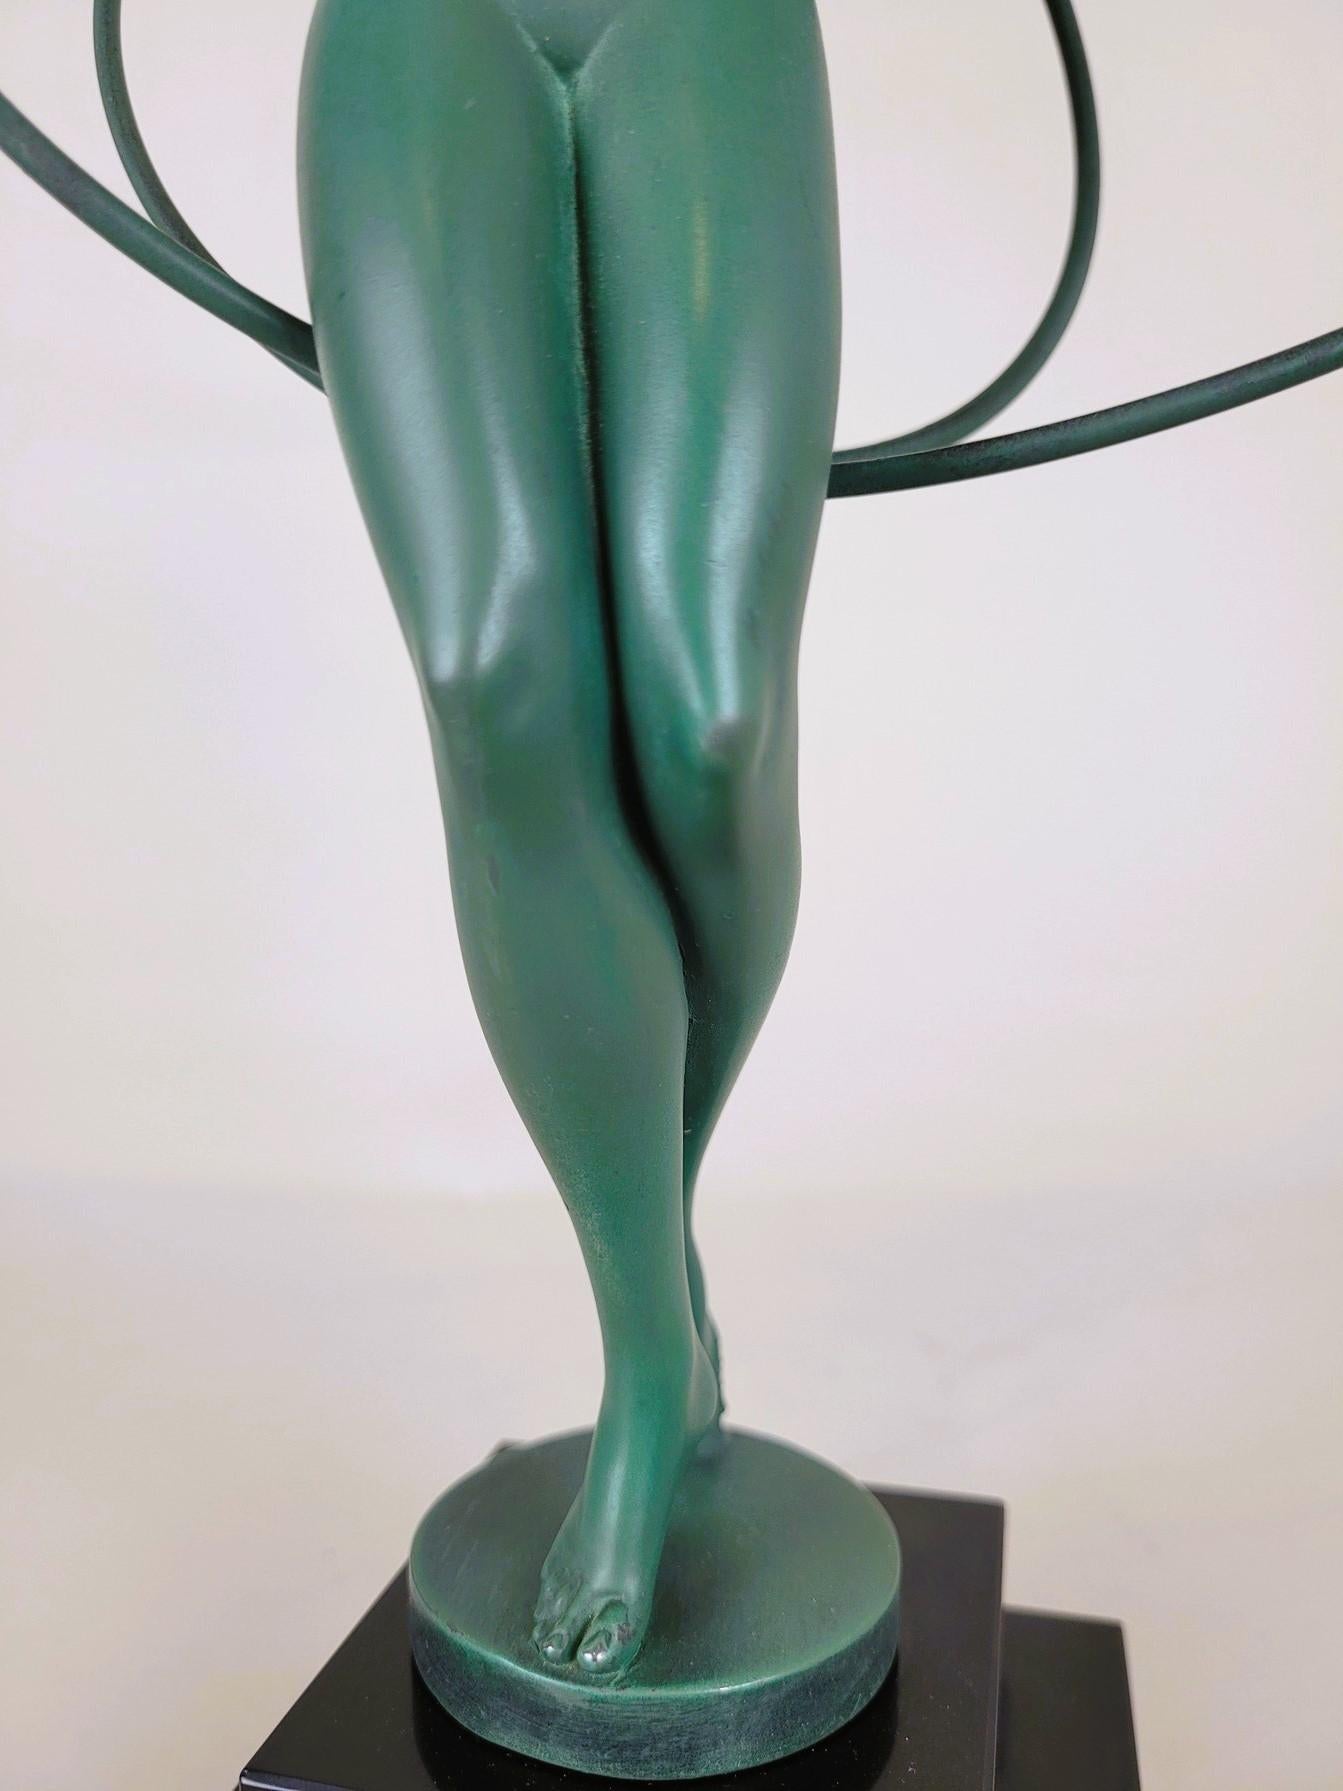 Illusion, Fayral And Max Le Verrier, Signed Sculpture, Art Deco, 20th Century For Sale 9